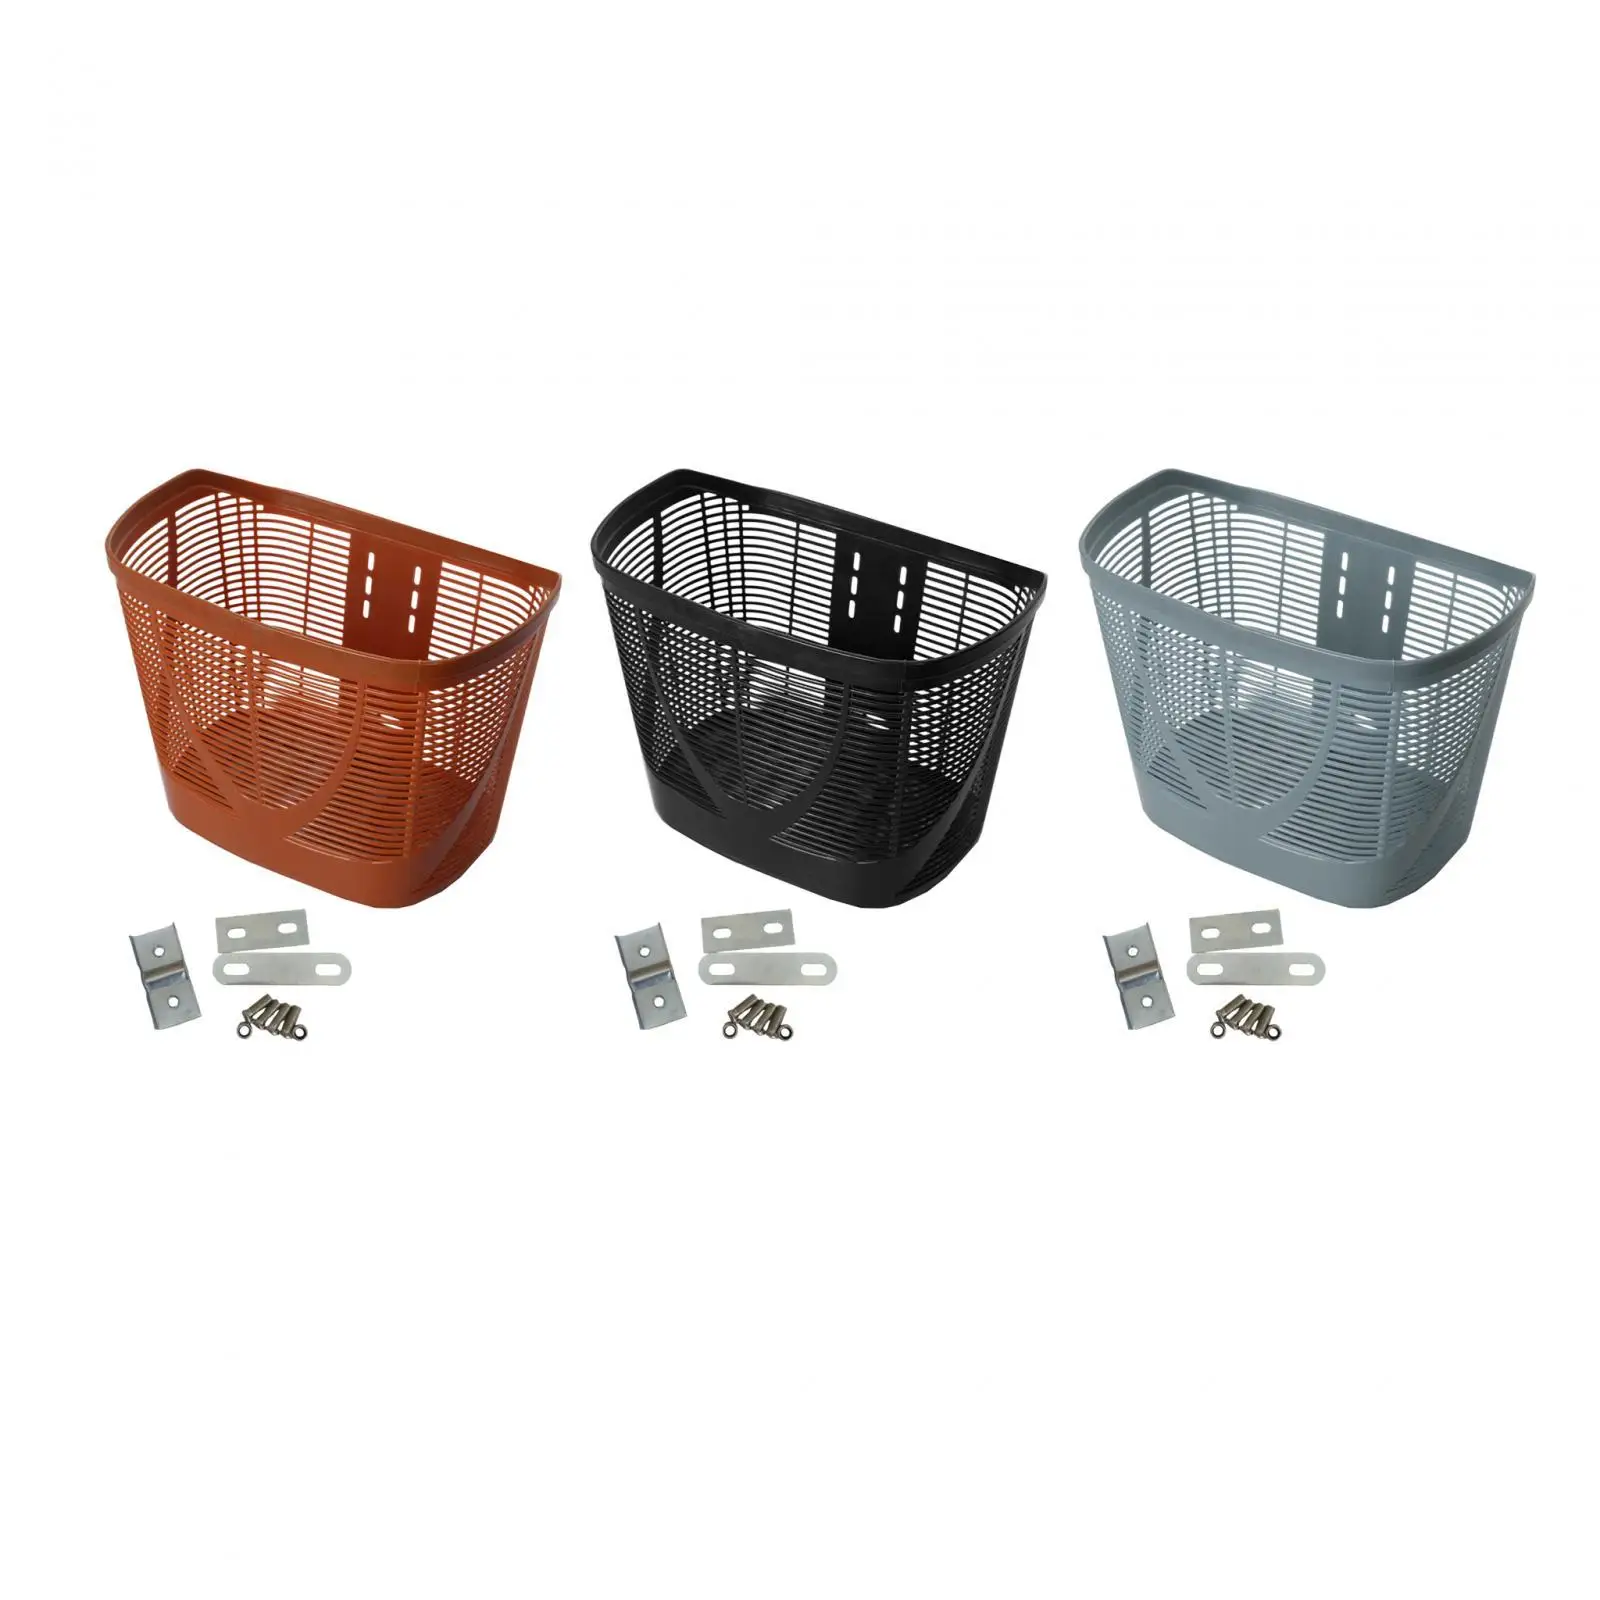 Bike Front Basket Men Women Bicycle Storage Basket Easy to Install for Camping Grocery Shopping